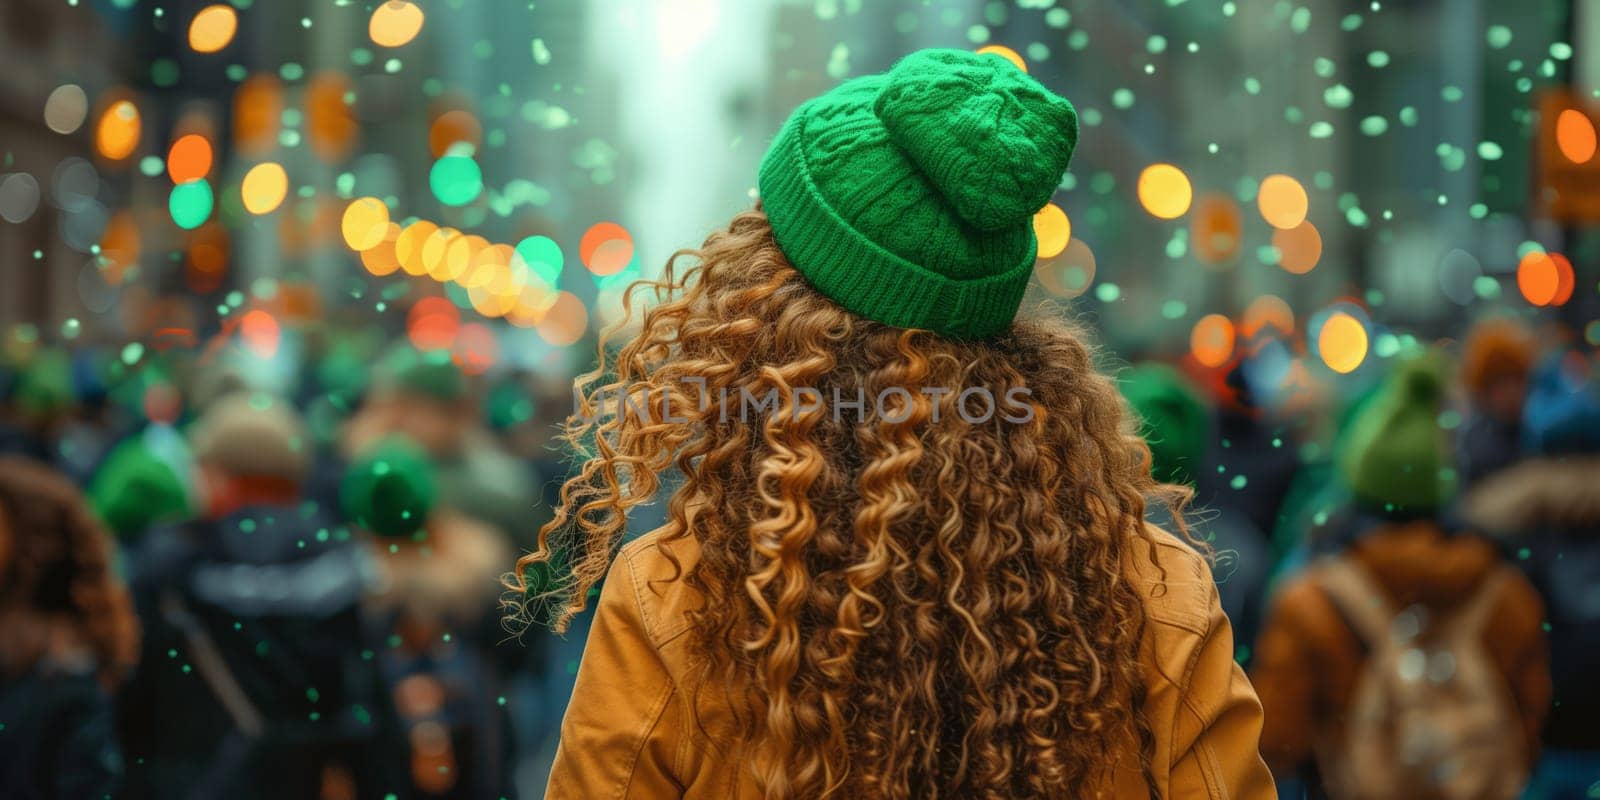 An organism with curly hair adorned with a green cap is strolling along a bustling city street, adding fun and entertainment to the crowd with her unique fashion accessory